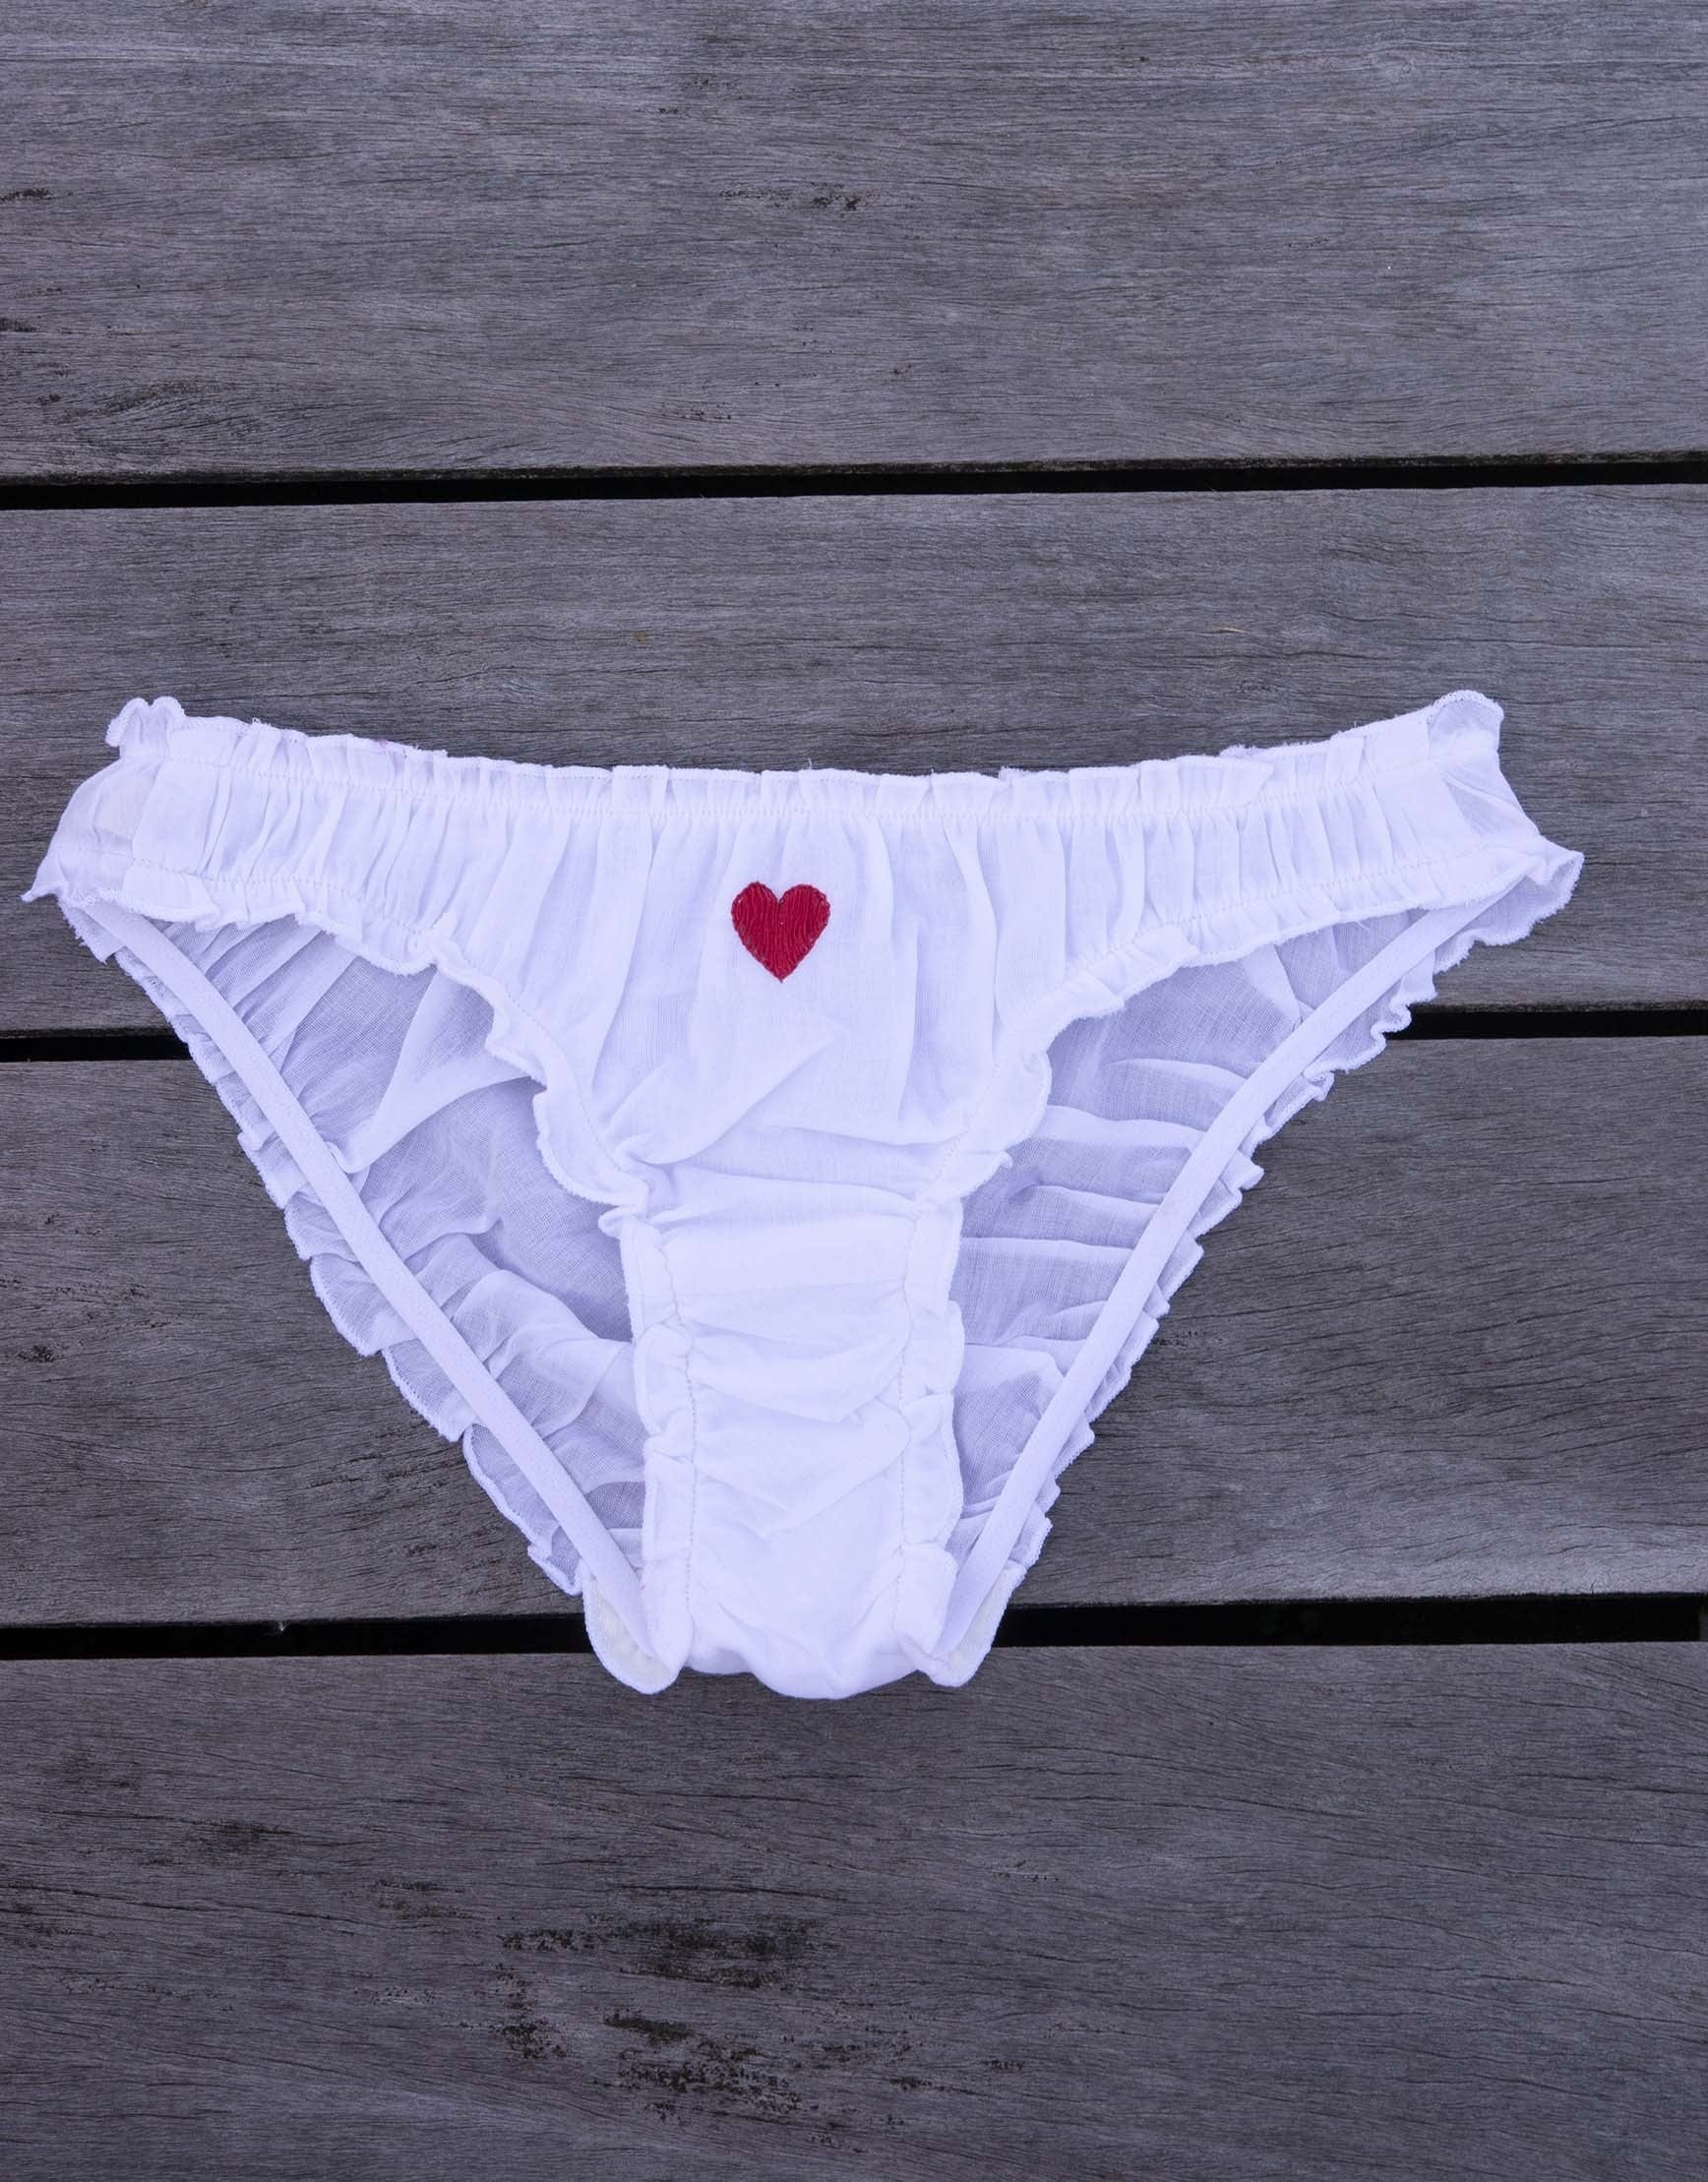 Personalized panties with small heart embroidered on the front